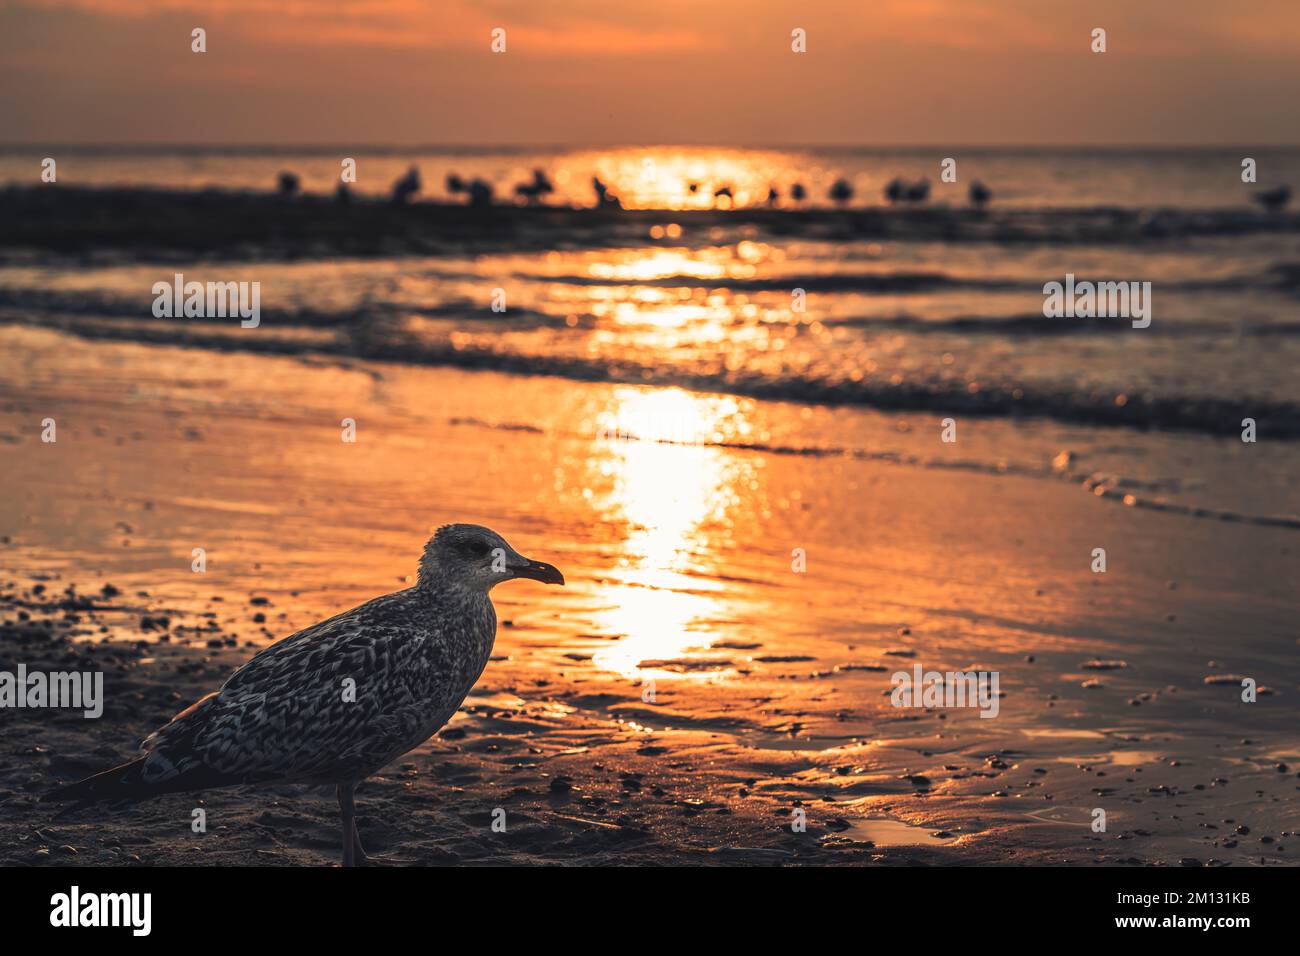 Seagull in foreground, view of North Sea, blurred background, west beach on North Sea island Norderney Stock Photo